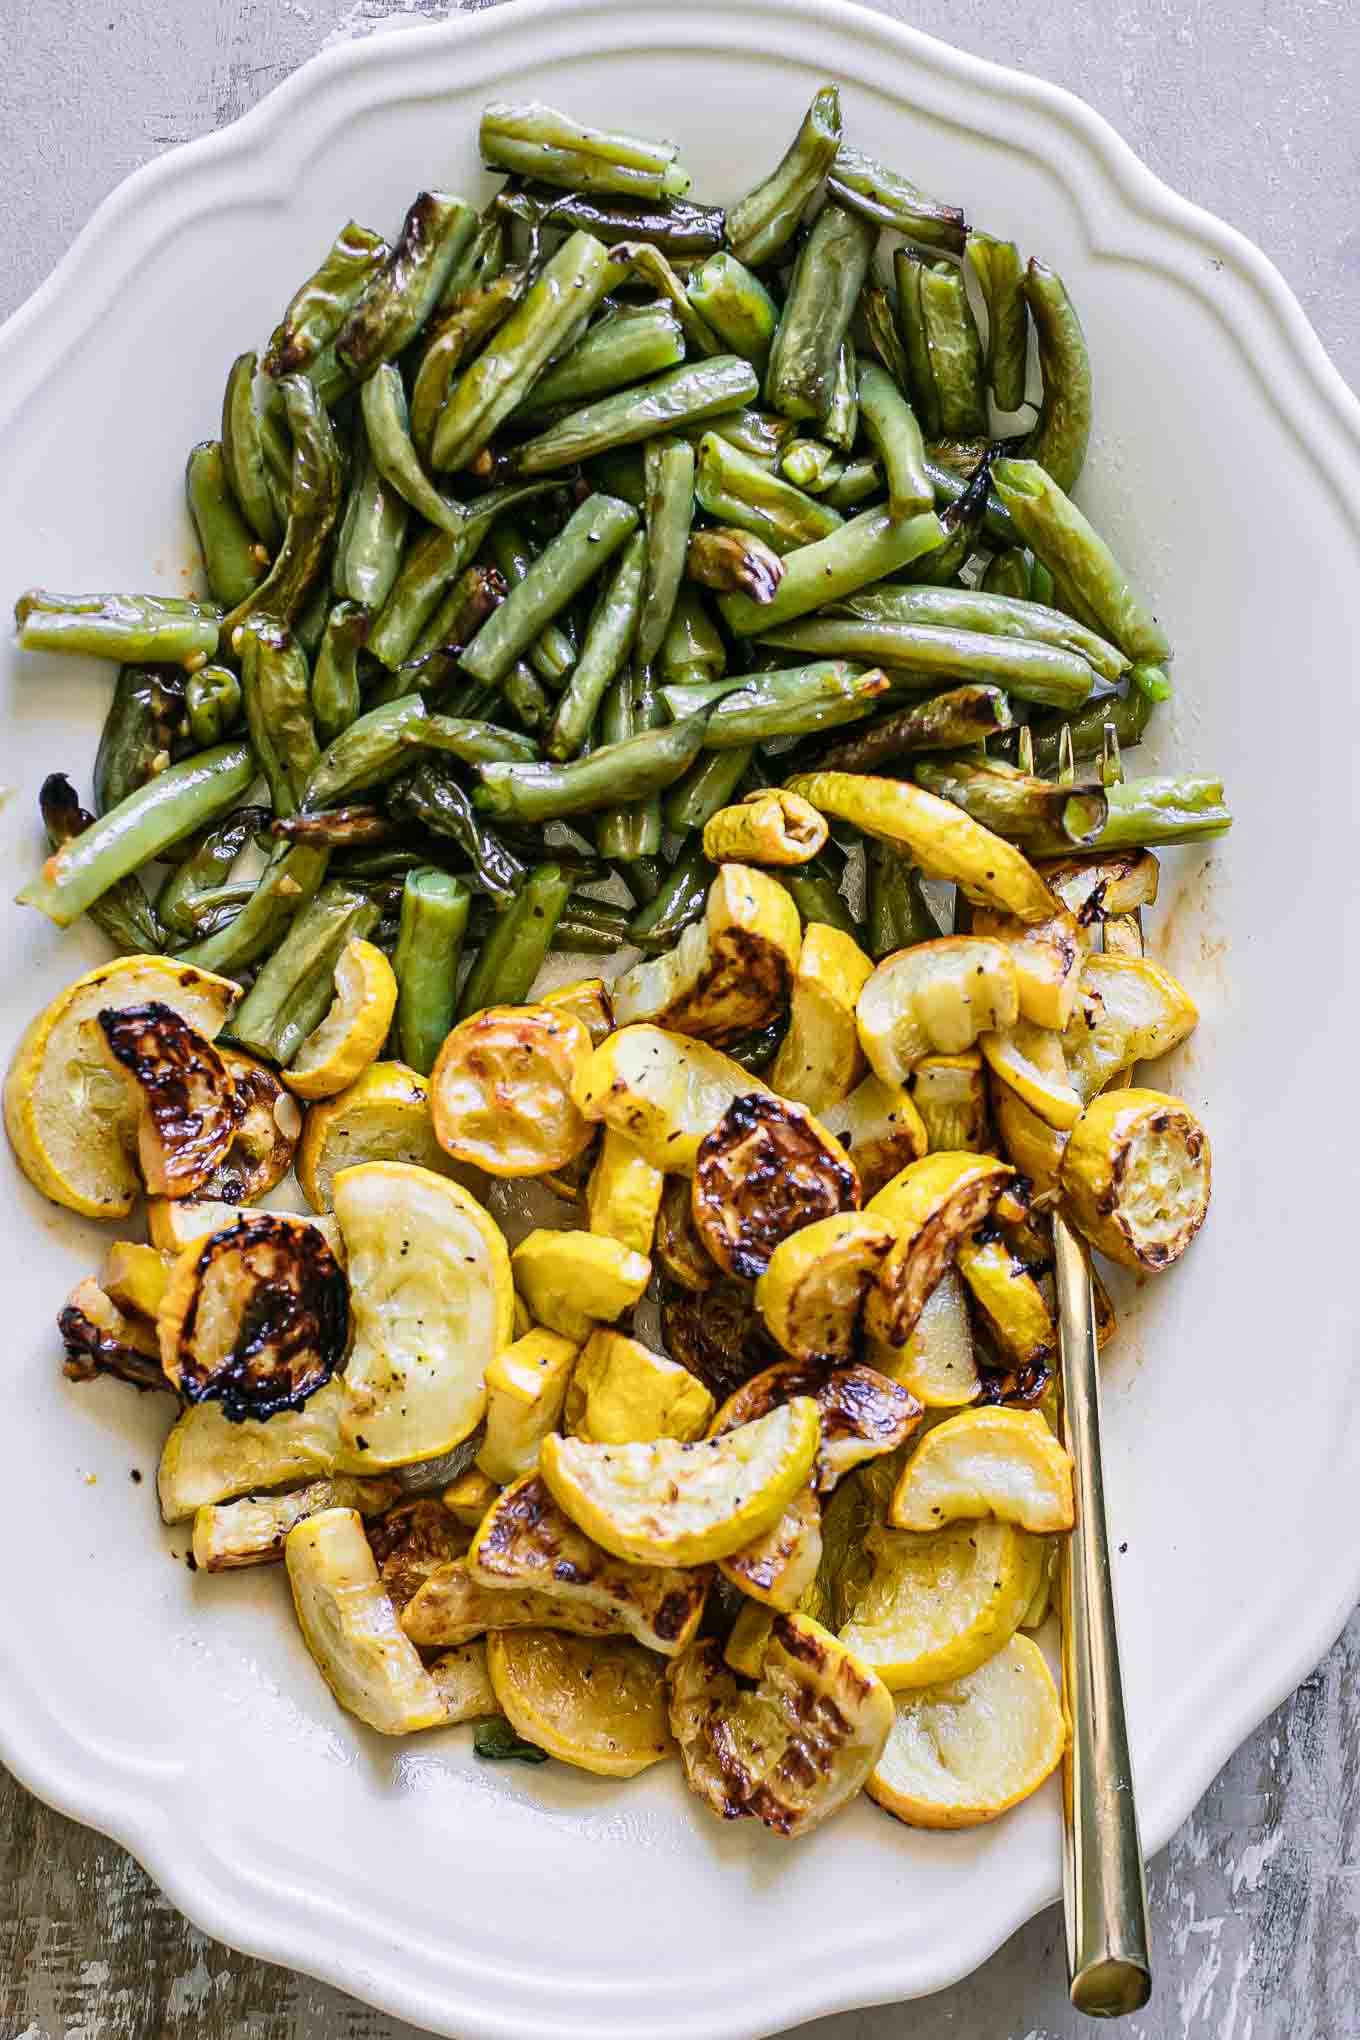 baked green beans and squash side dish with a gold fork on a white table